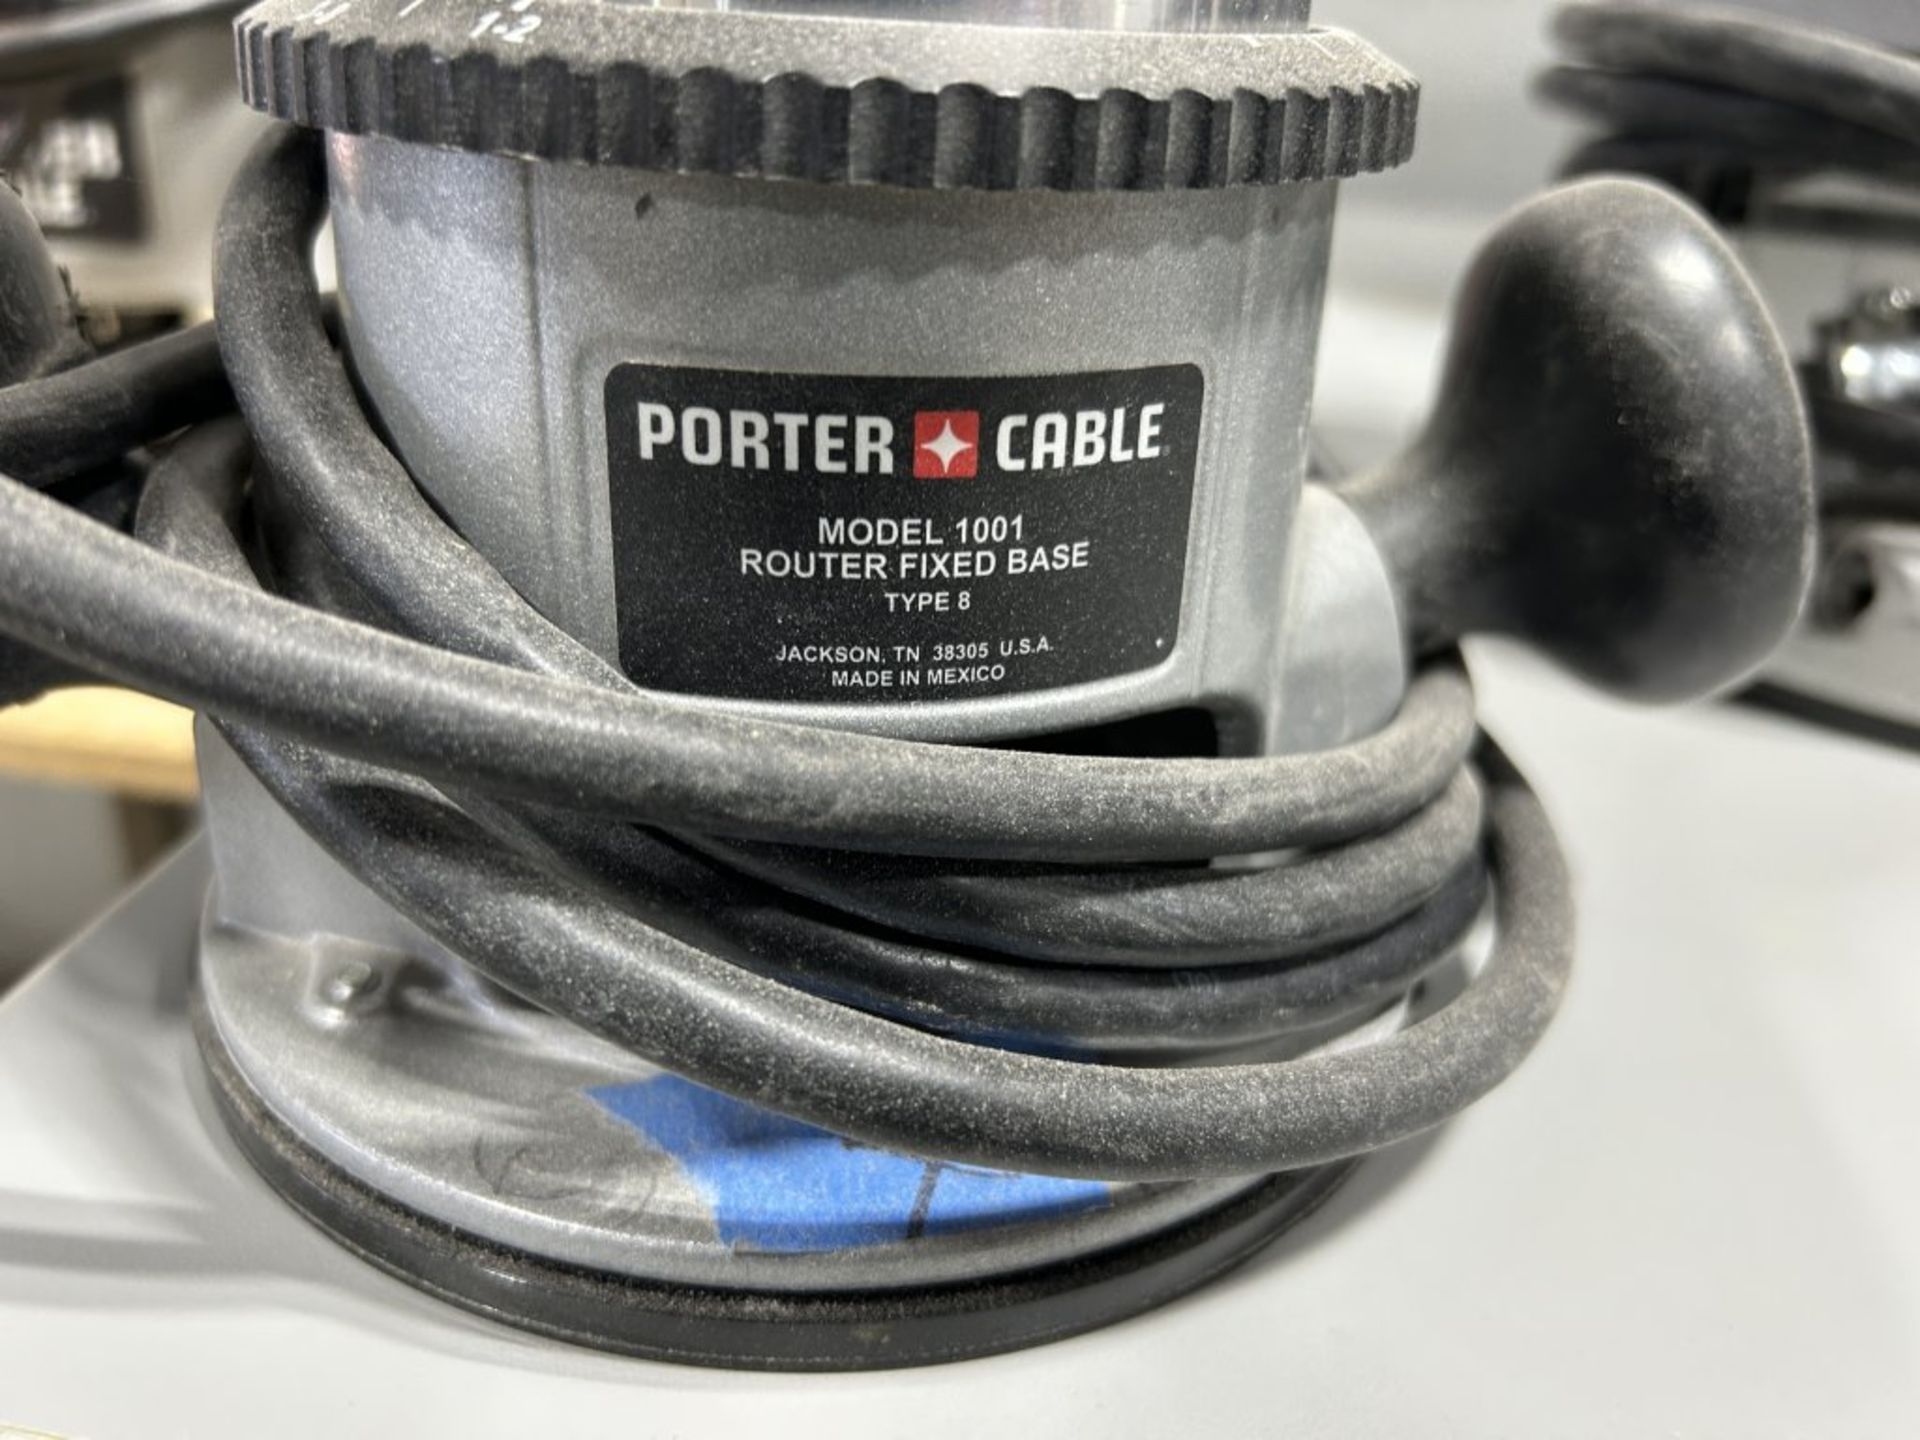 PORTER-CABLE SPEEDMATIC 7539 ROUTER AND PORTER-CABLE 1001 ROUTER - Image 6 of 7